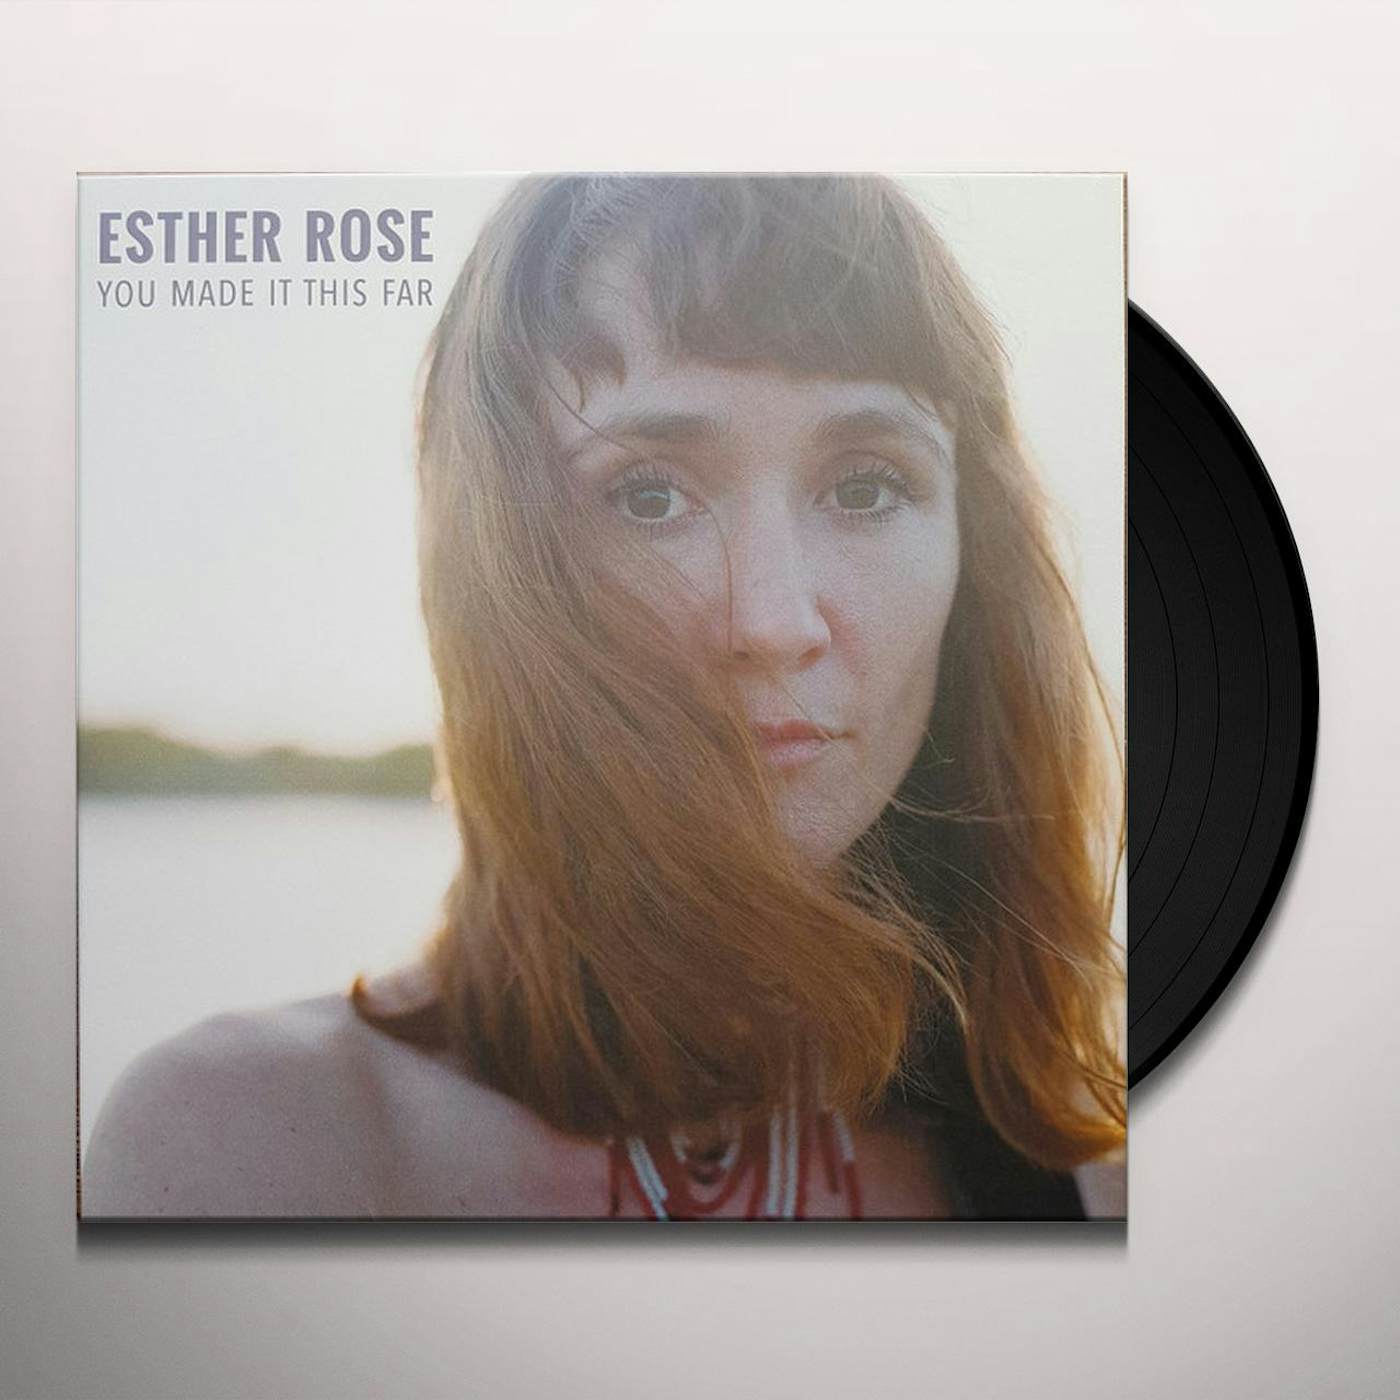 Esther Rose YOU MADE IT THIS FAR (SOFT BLUE VINYL/IMPORT) Vinyl Record